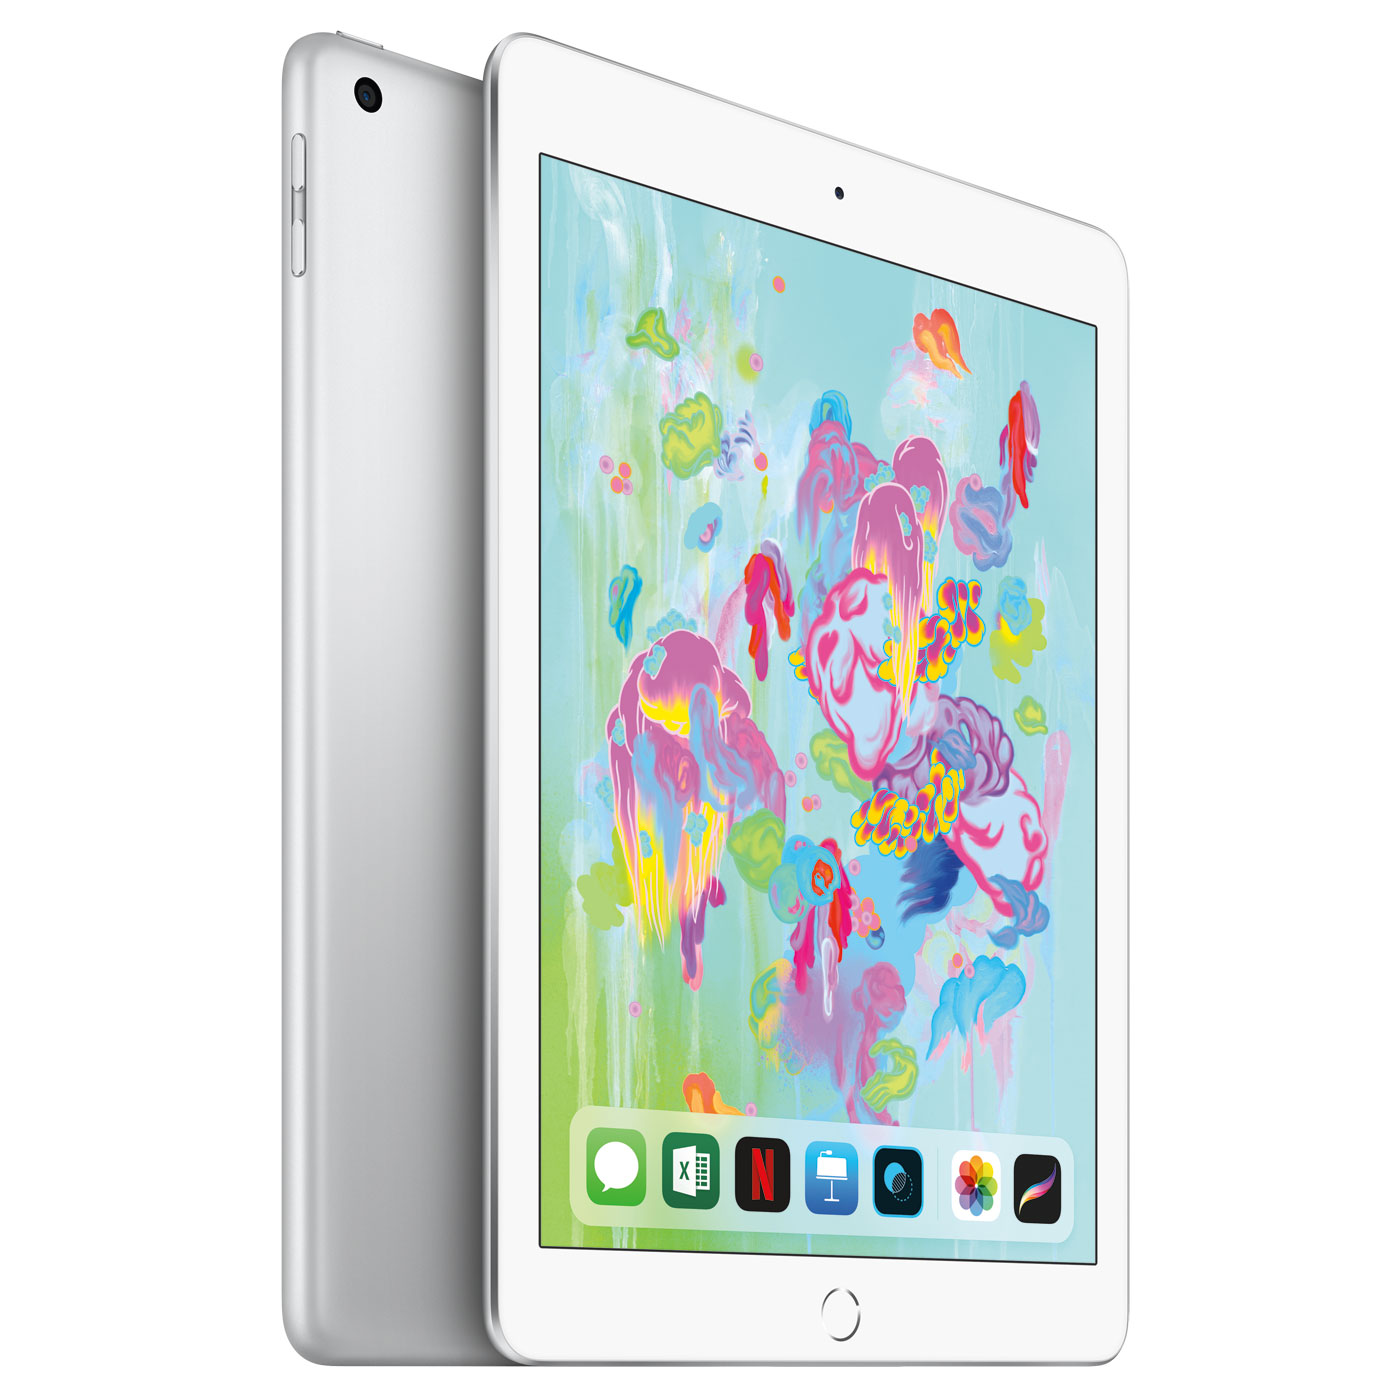 Apple Ipad Wi Fi Gb Wi Fi Argent Mr G Nf A Achat Tablette Apple Pour